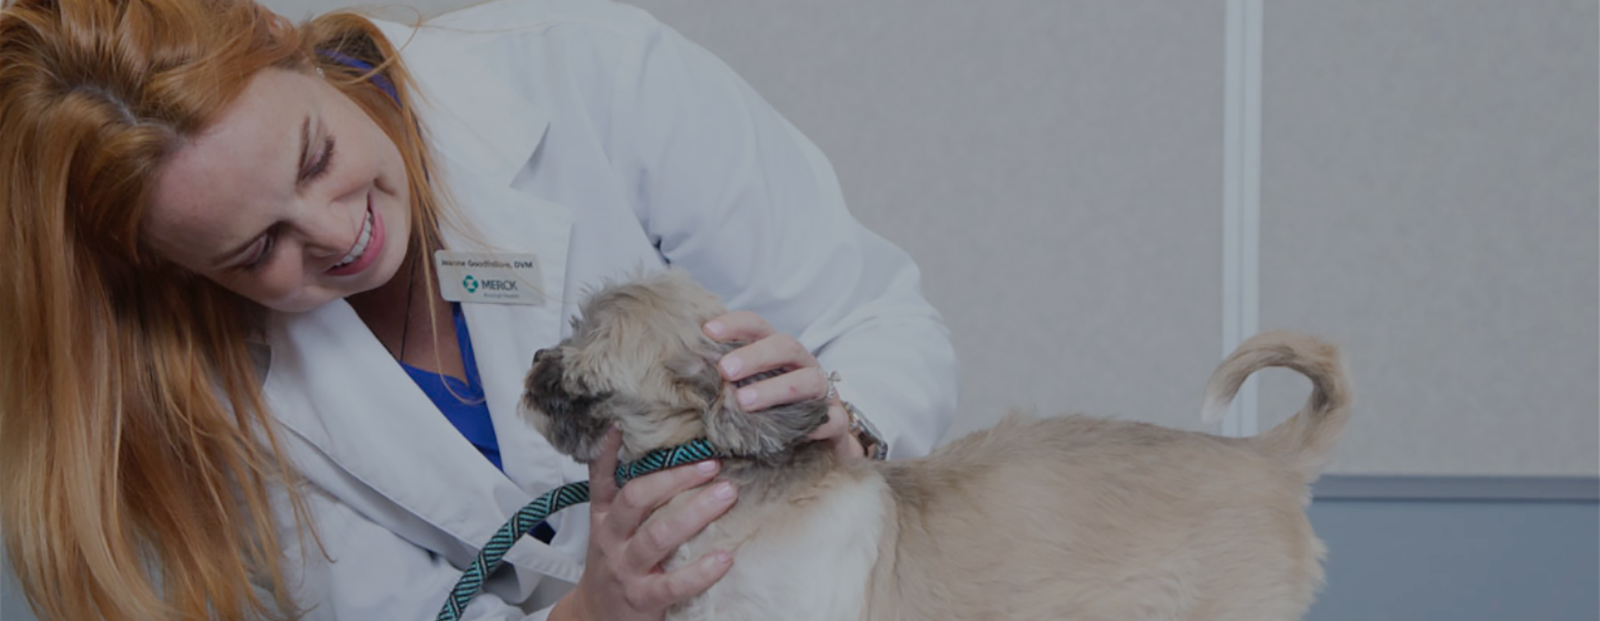 Providing veterinary professionals with the latest technical knowledge and quality CE